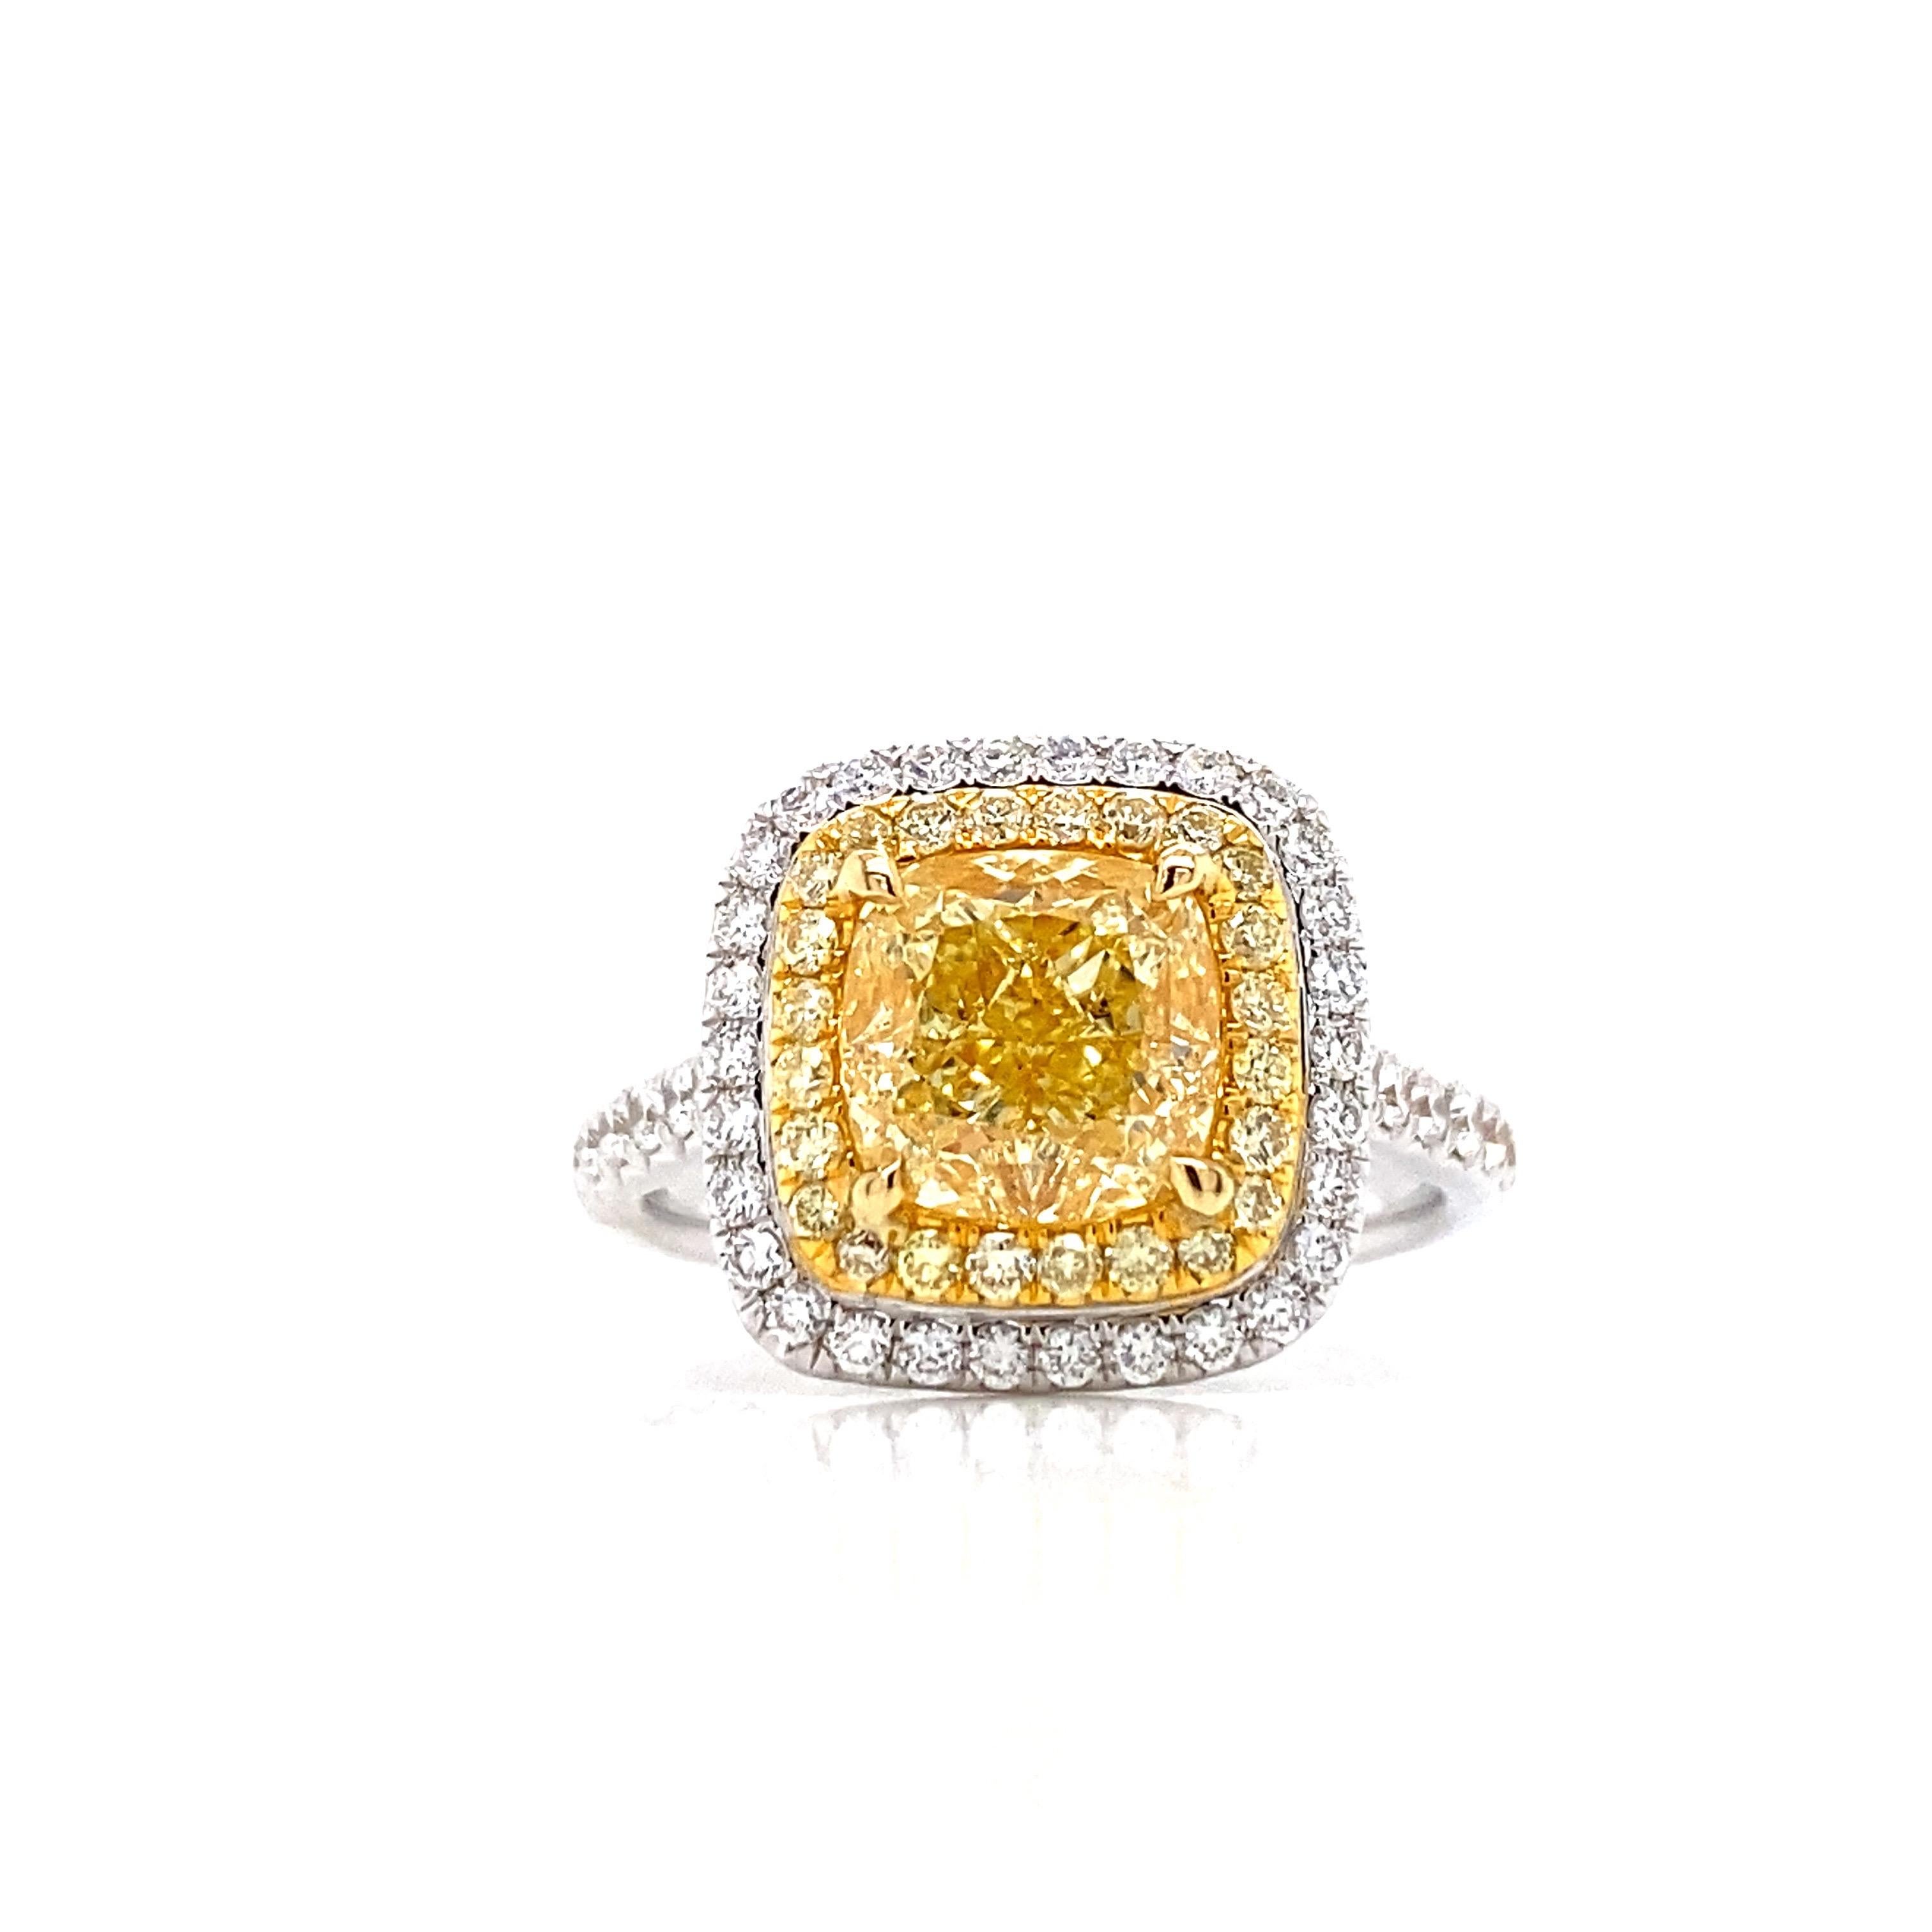 From the Vault at Emilio Jewelry, located on New York's iconic 5th Avenue,
Center stone: a gorgeous fancy yellow diamond weighing just over 2.30cts certified as fancy yellow with no overtone. Clarity vvs2! Set in 18k with another .70ct of F color